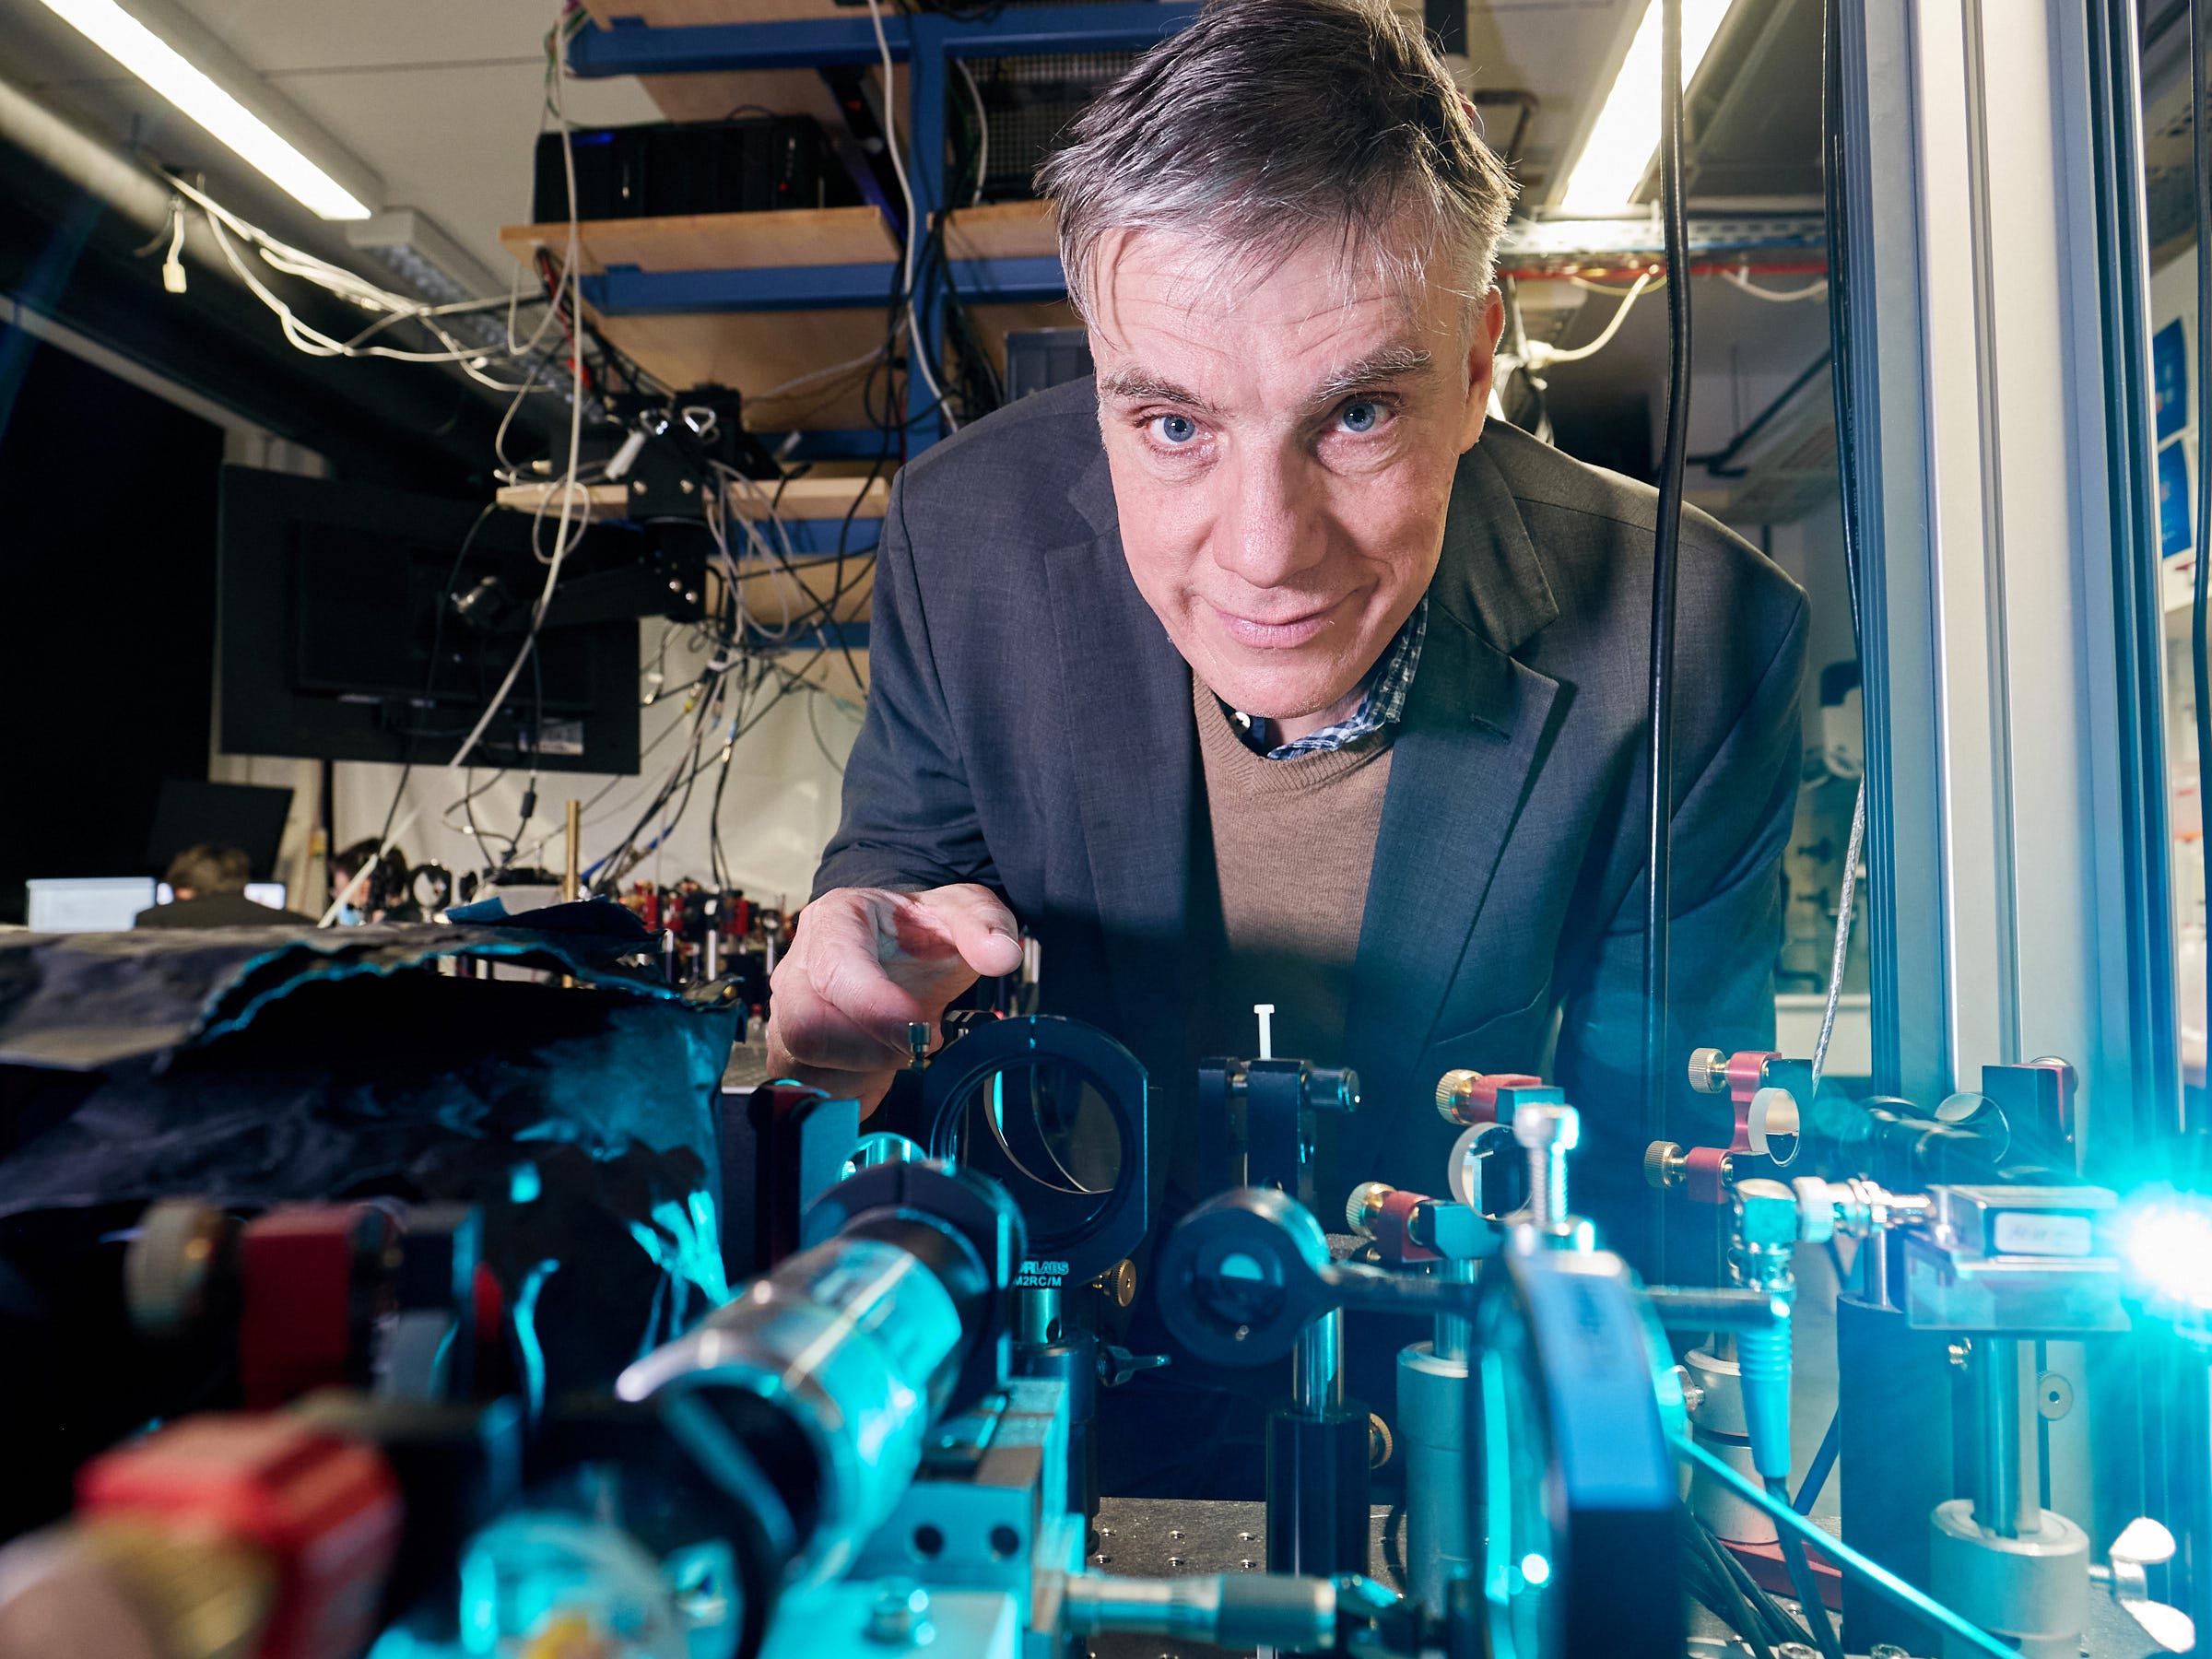 A New State of Physicists Observe New Phase in Bose-Einstein Condensate of Light Particles